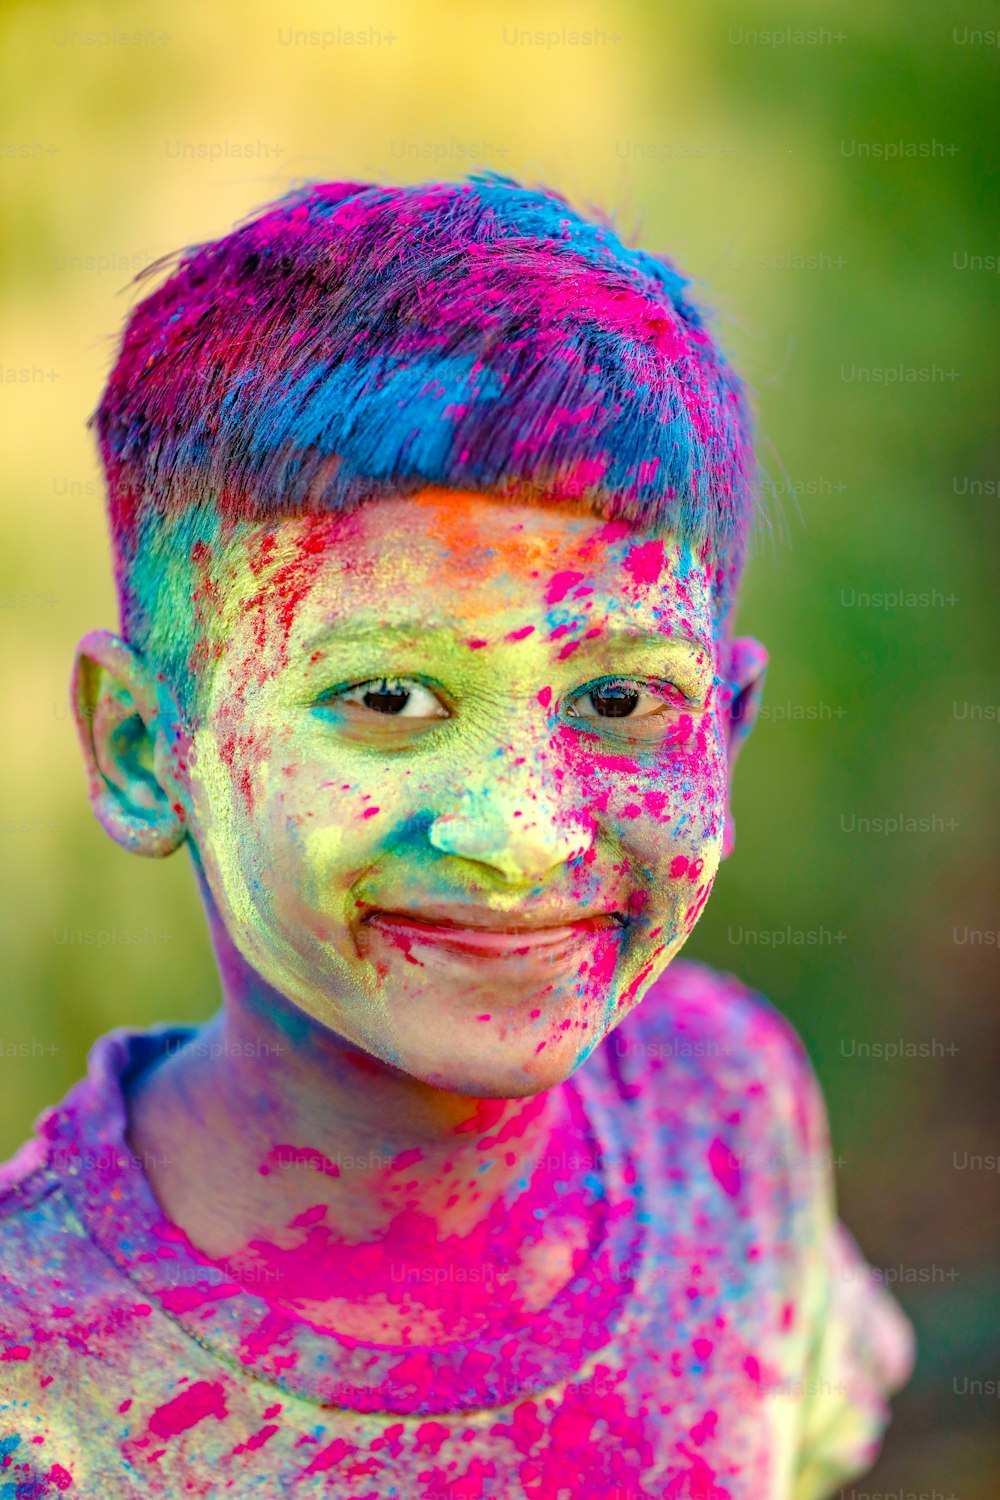 Indian child playing with the color in holi festival